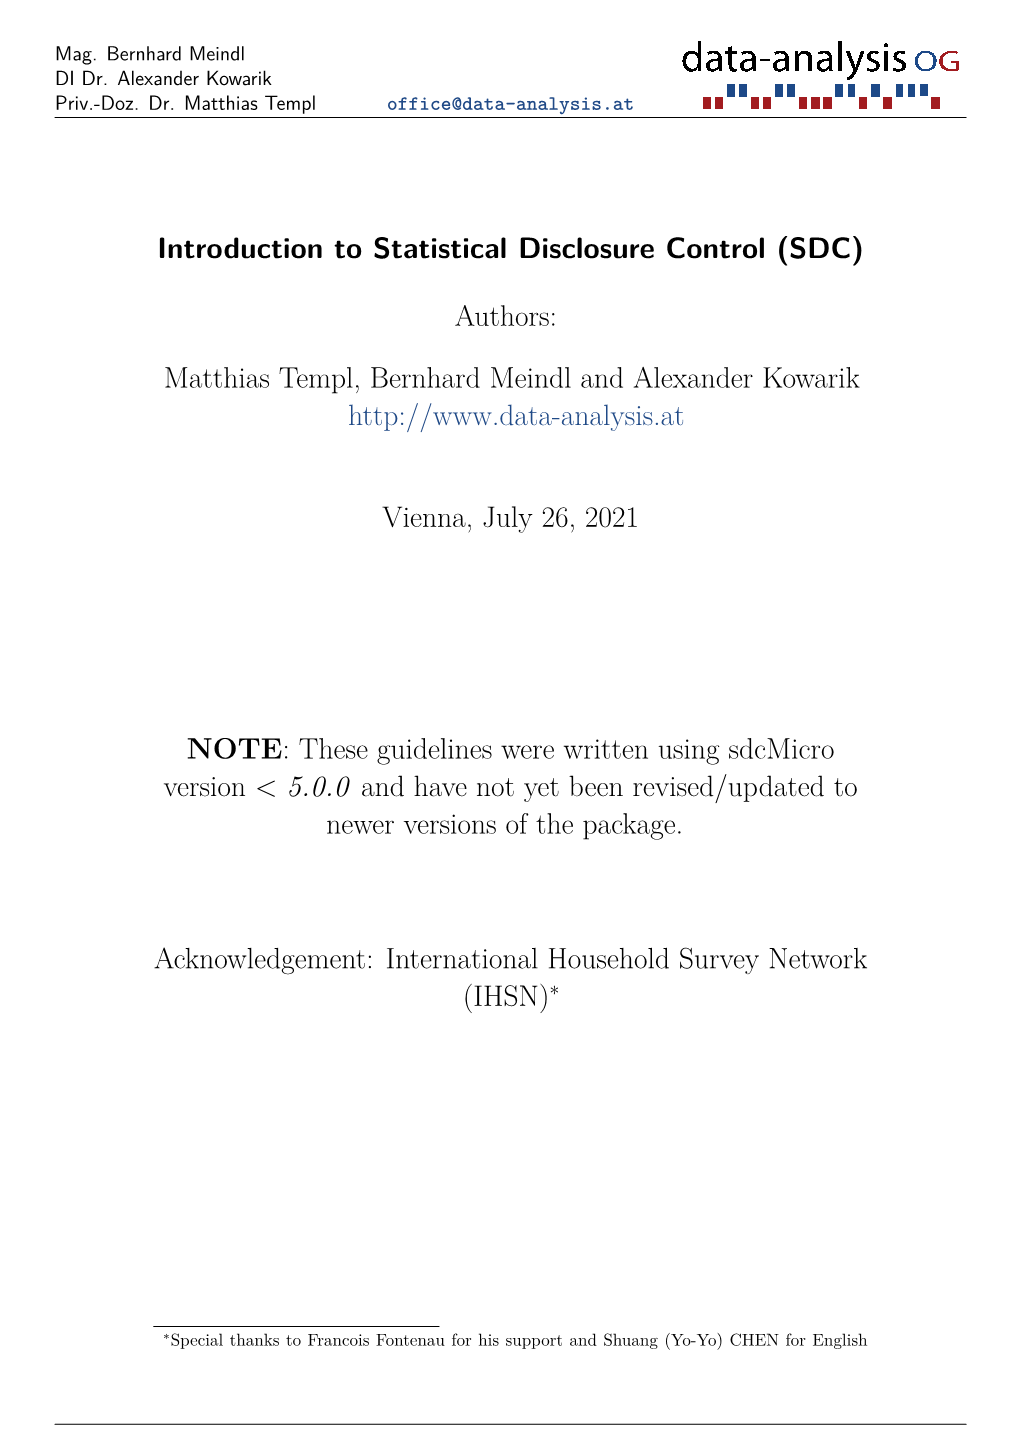 Guidelines for Statistical Disclosure Control Using Sdcmicro